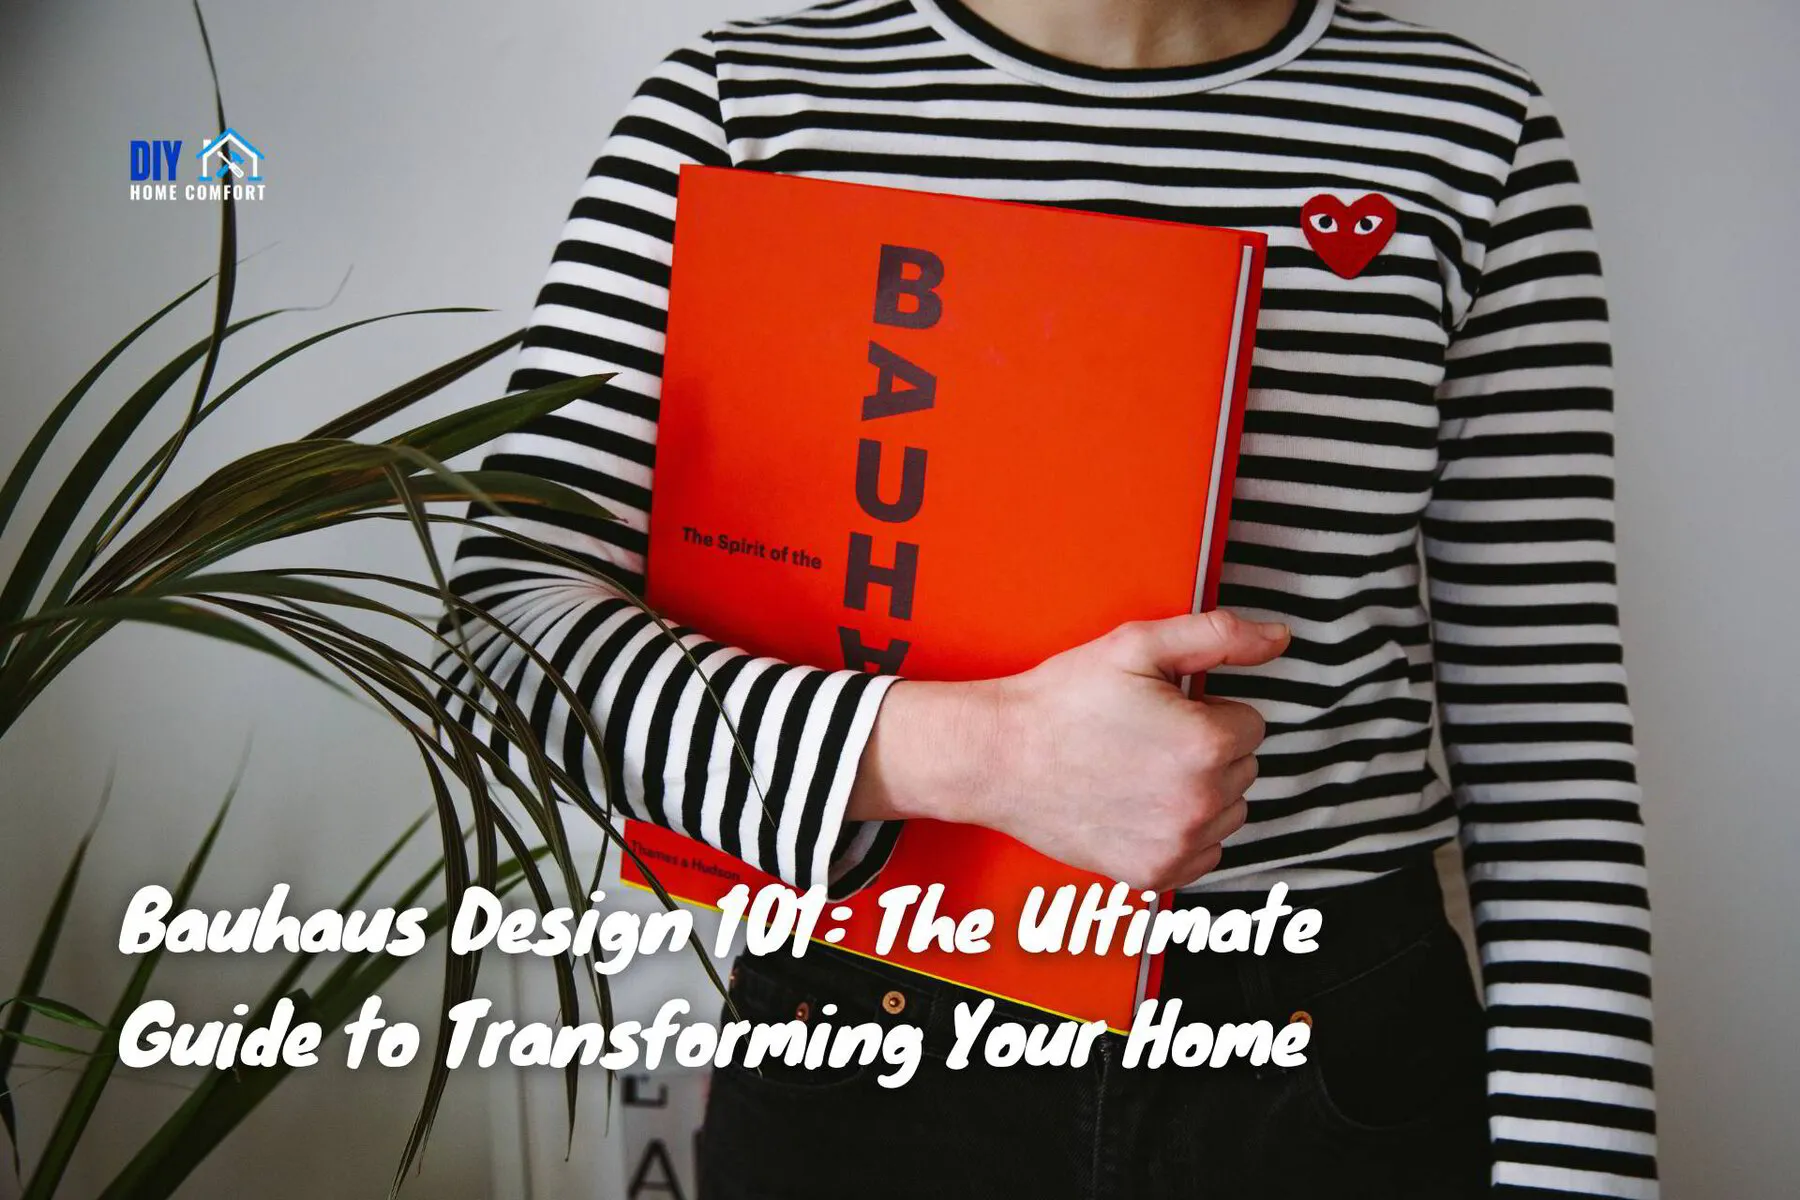 Bauhaus Design 101: The Ultimate Guide to Transforming Your Home | DIY Home Comfort